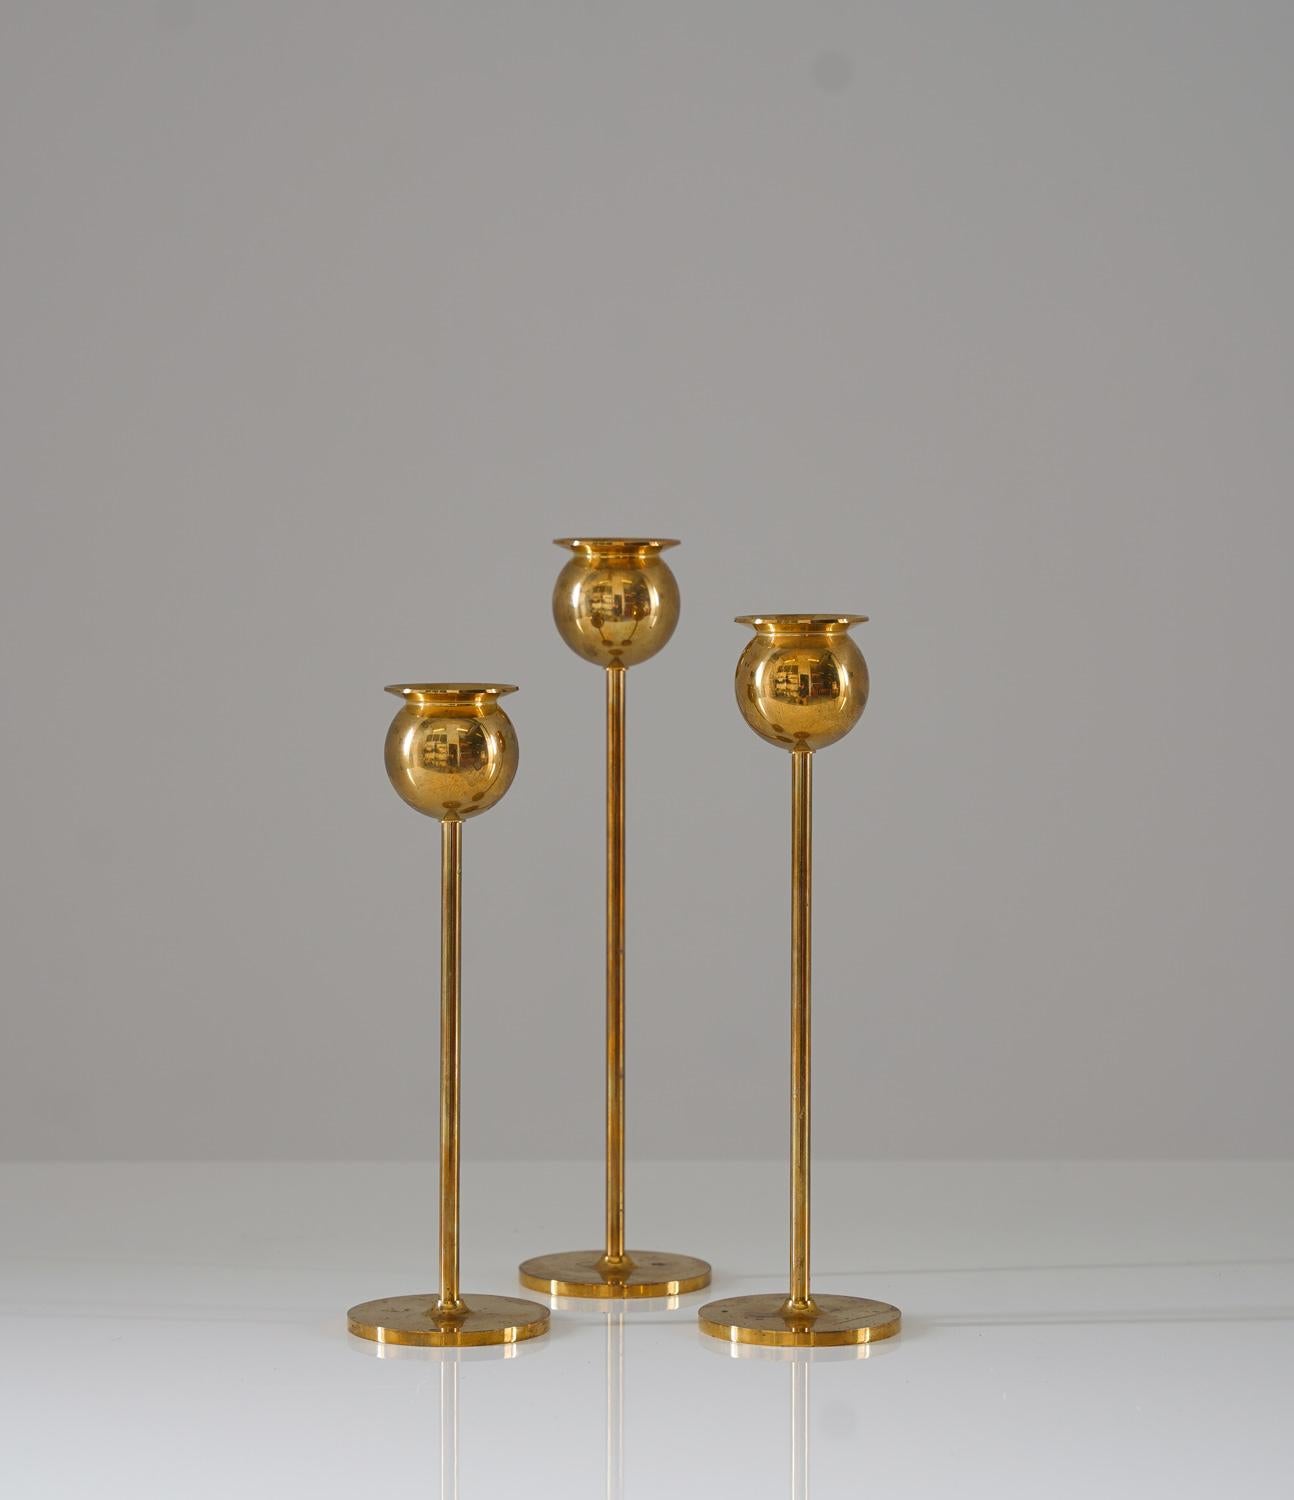 Add a touch of elegance to any space with this set of three stunning candlesticks in brass by Pierre Forsell for Skultuna, Sweden. Measuring 23, 21, and 19cm in height, these candlesticks are the perfect height for any tabletop or mantle. The brass